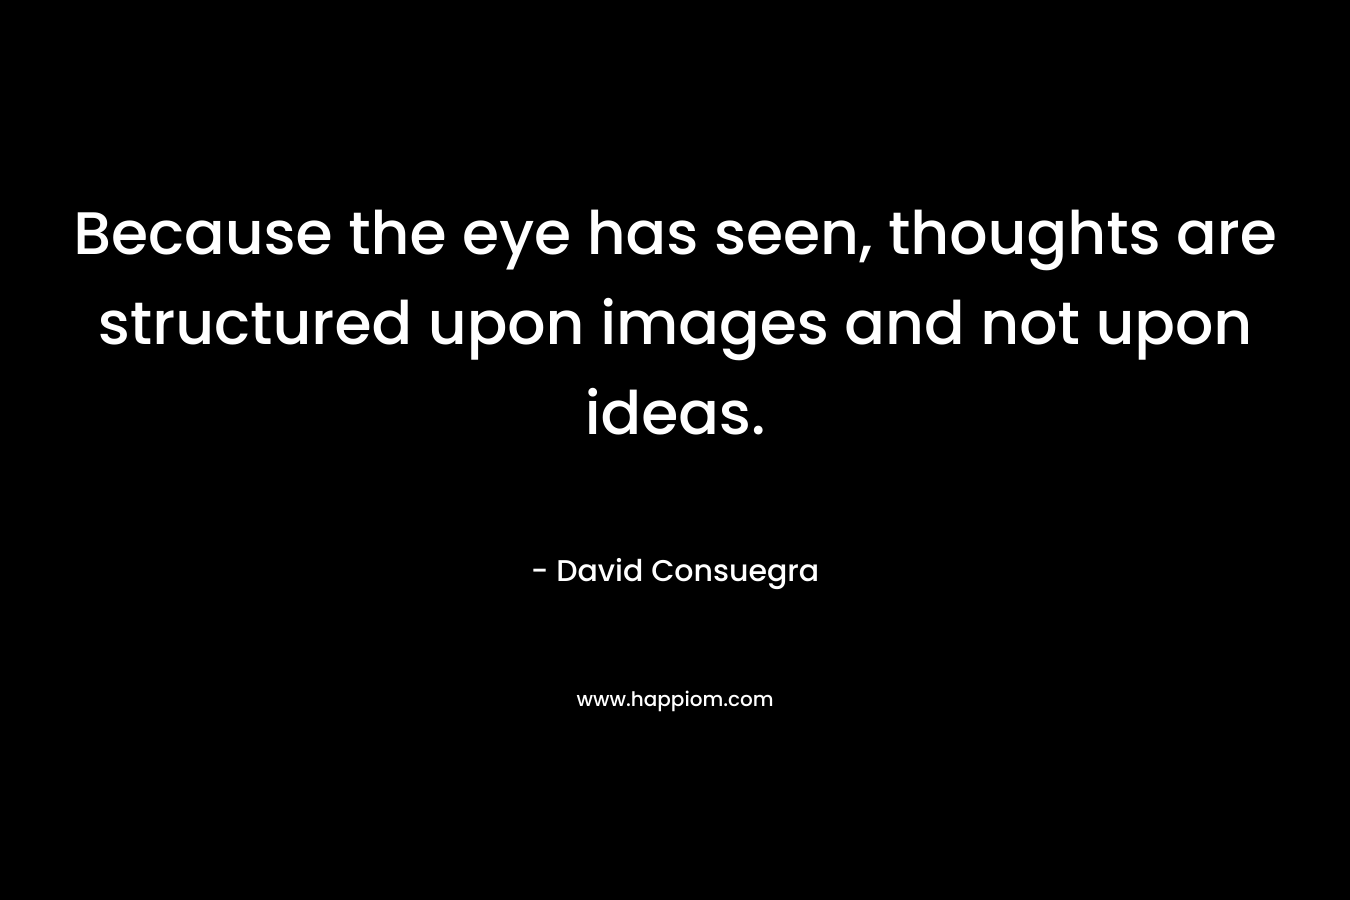 Because the eye has seen, thoughts are structured upon images and not upon ideas.